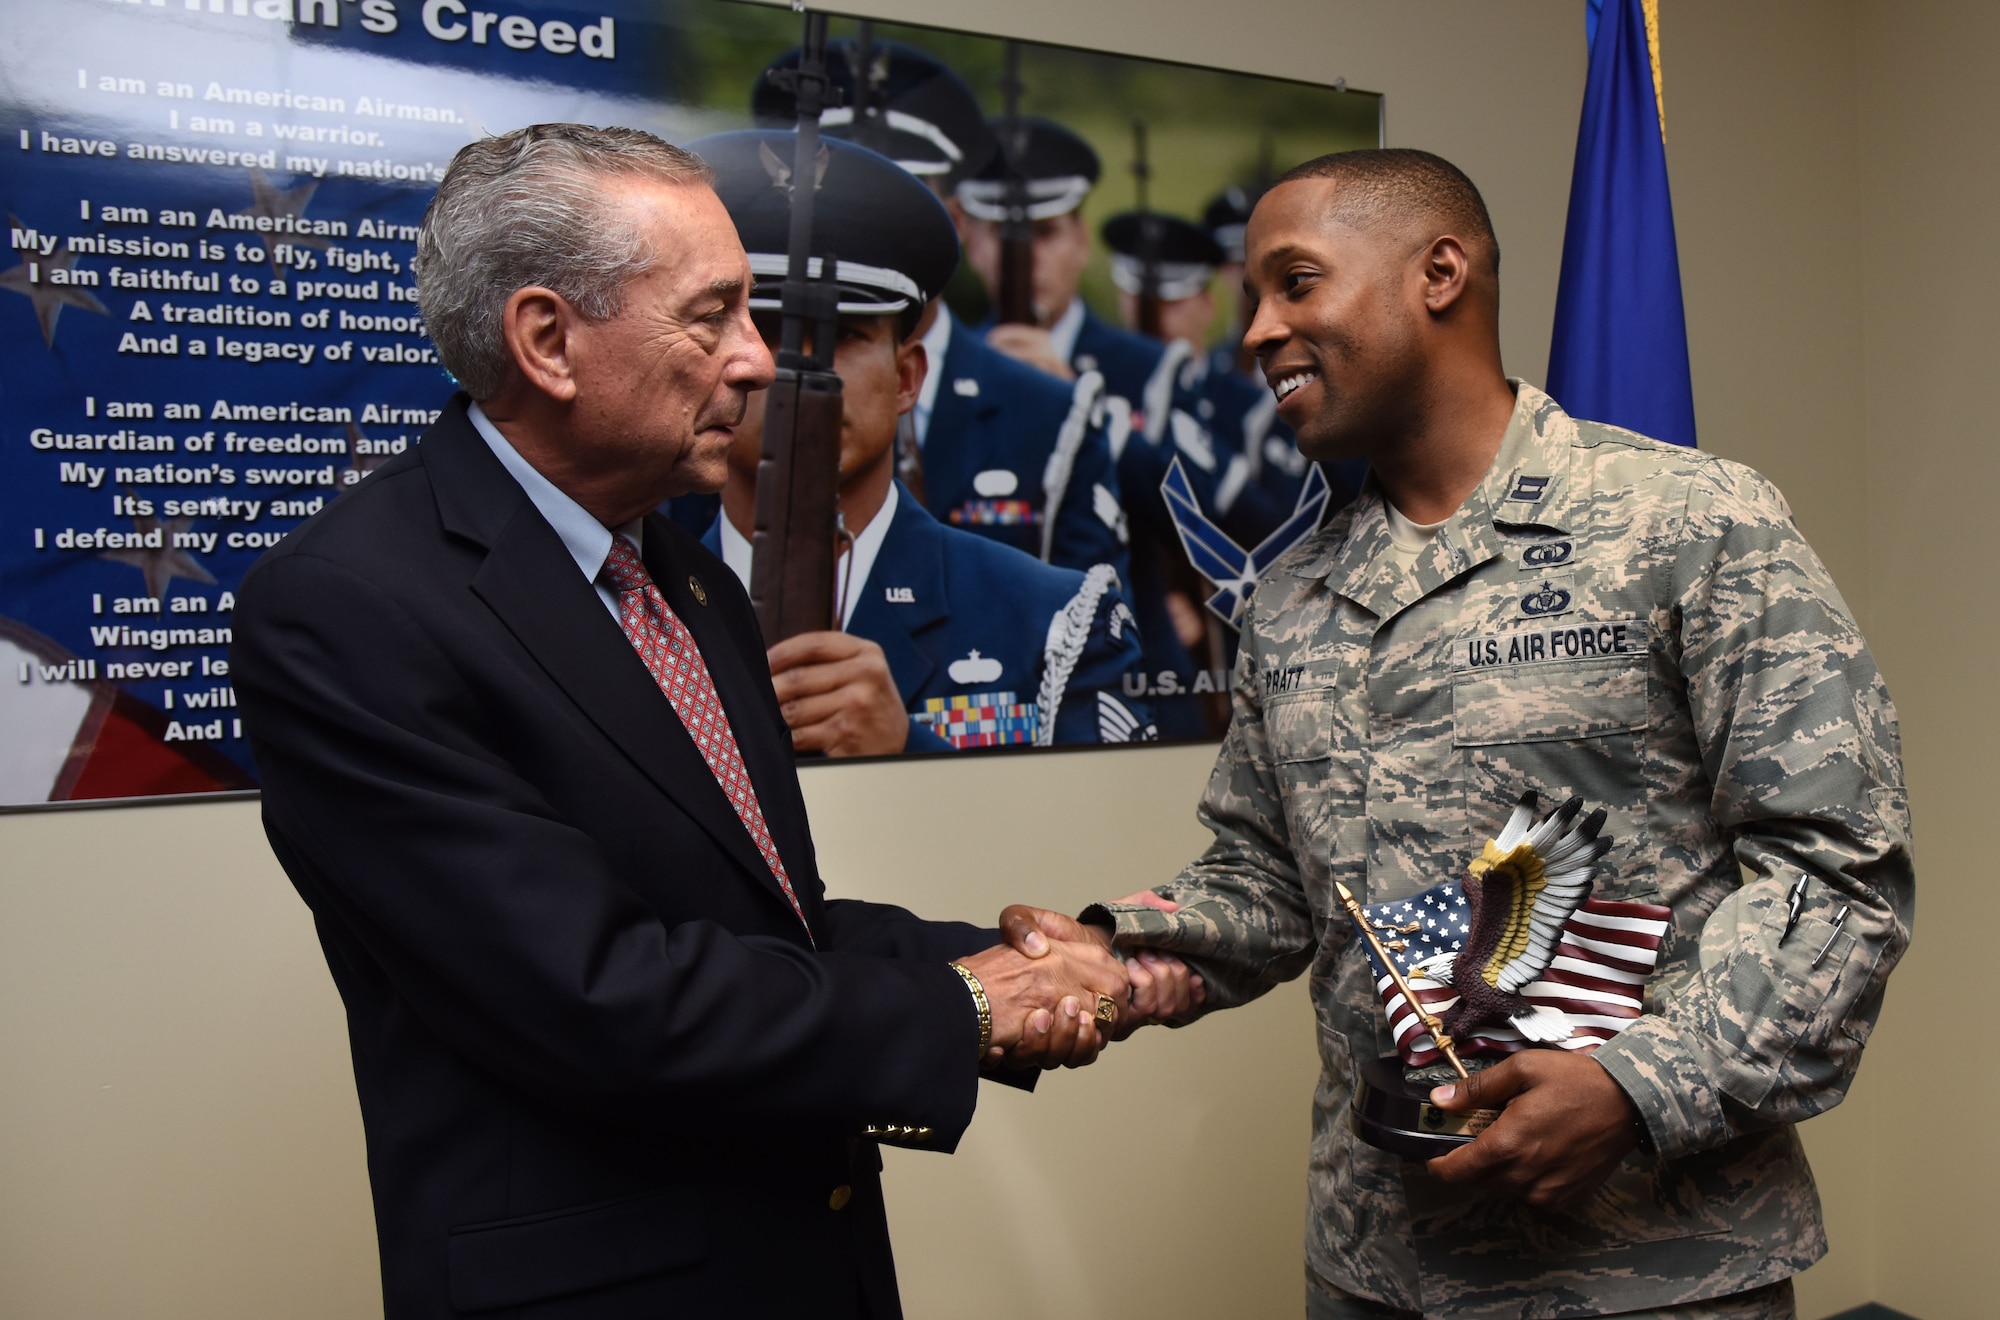 Retired Chief Master Sgt. Byron “BT” Parcenue presents Capt. Edwin Pratt, 81st Training Wing executive officer, the Byron“BT” Parcenue Airfield Operations Professional of the Year, during an awards presentation at Cody Hall June 8, 2017, on Keesler Air Force Base, Miss. This was a 2016 Air Education and Training Command Airfield Operations Annual Award. (U.S. Air Force photo by Kemberly Groue)